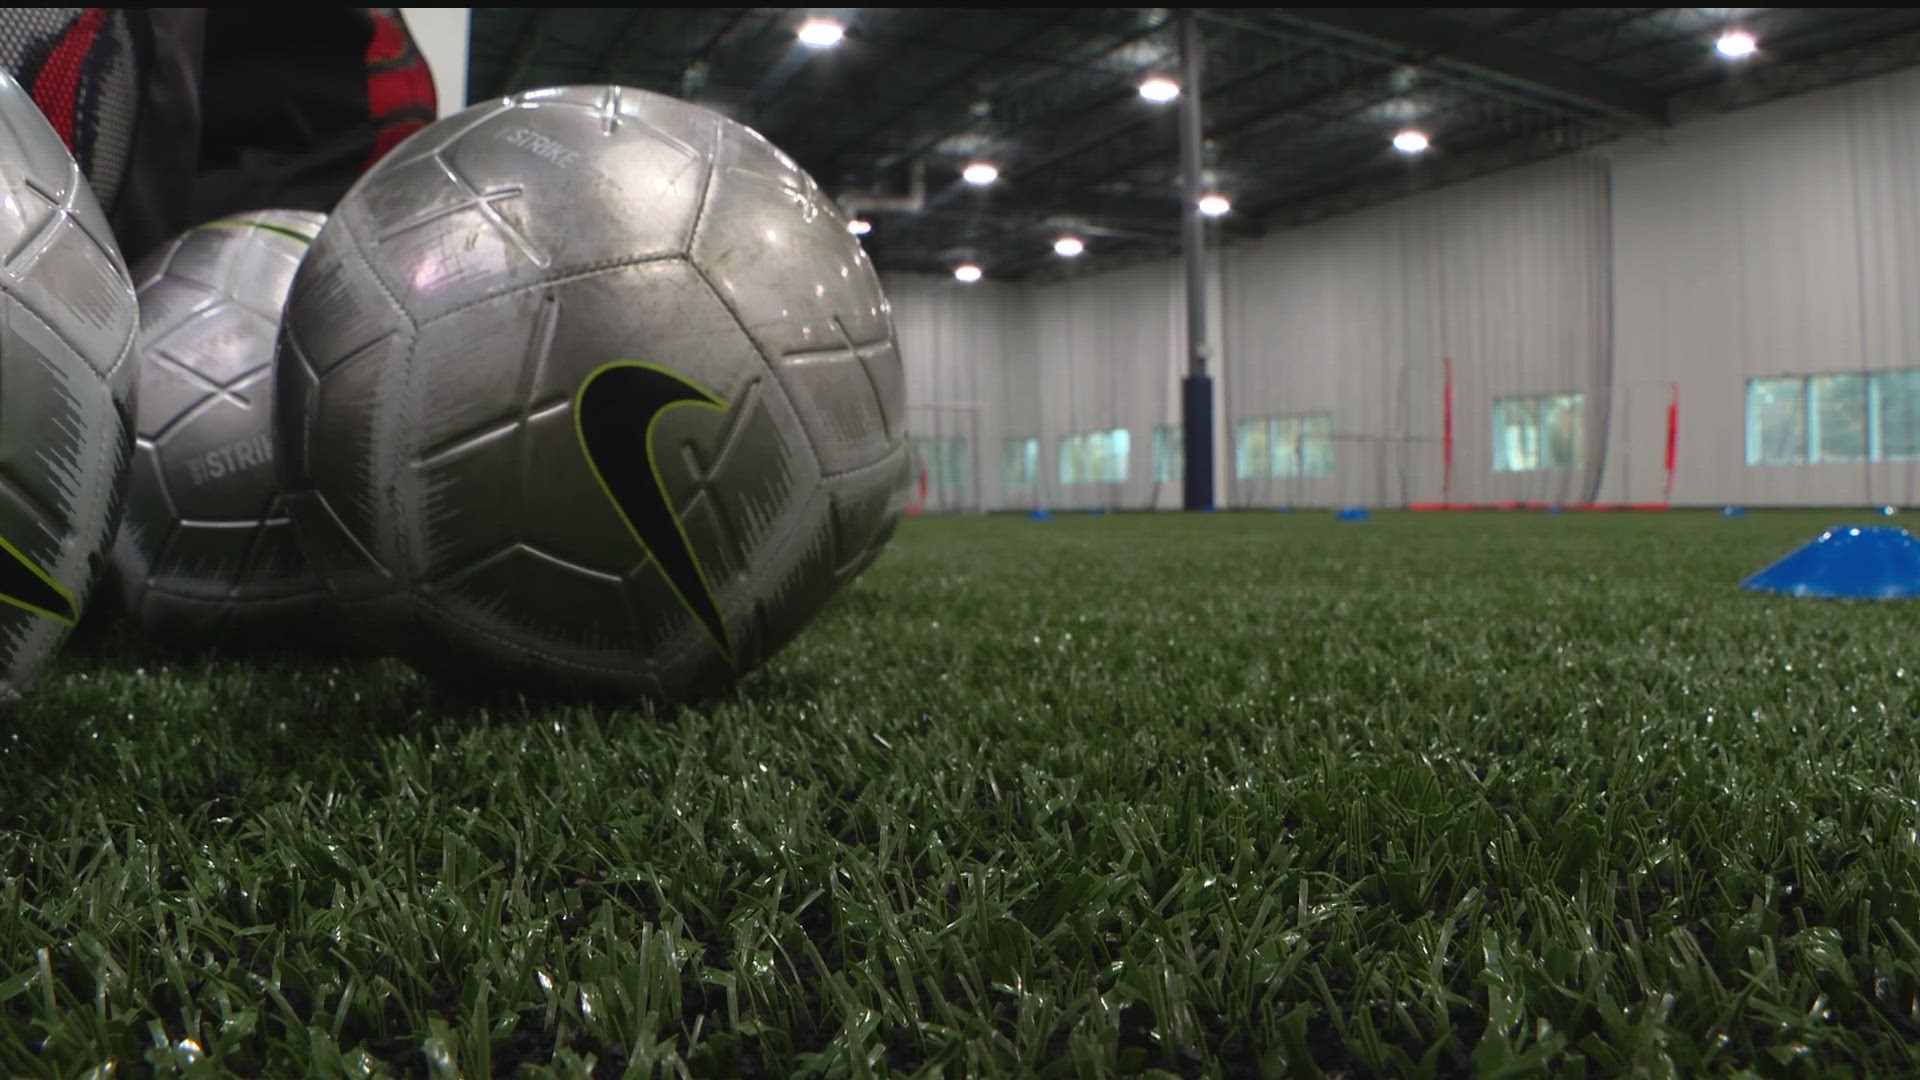 Fusion Soccer Club — one of Minnesota's largest youth soccer programs — is celebrating the grand opening of a new space this weekend in Plymouth.